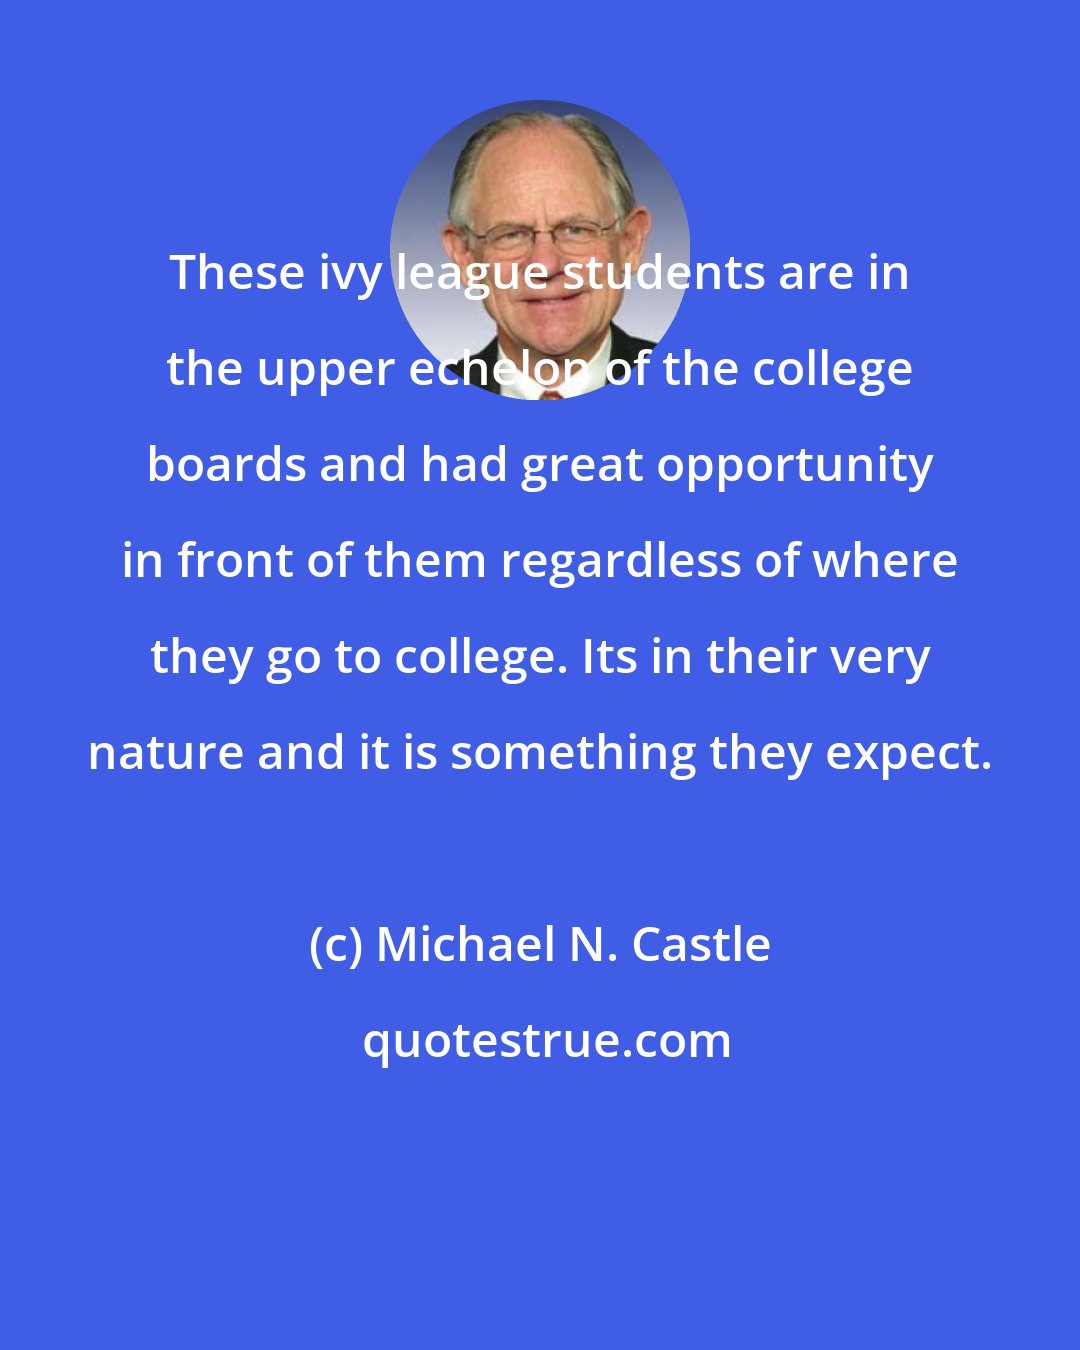 Michael N. Castle: These ivy league students are in the upper echelon of the college boards and had great opportunity in front of them regardless of where they go to college. Its in their very nature and it is something they expect.